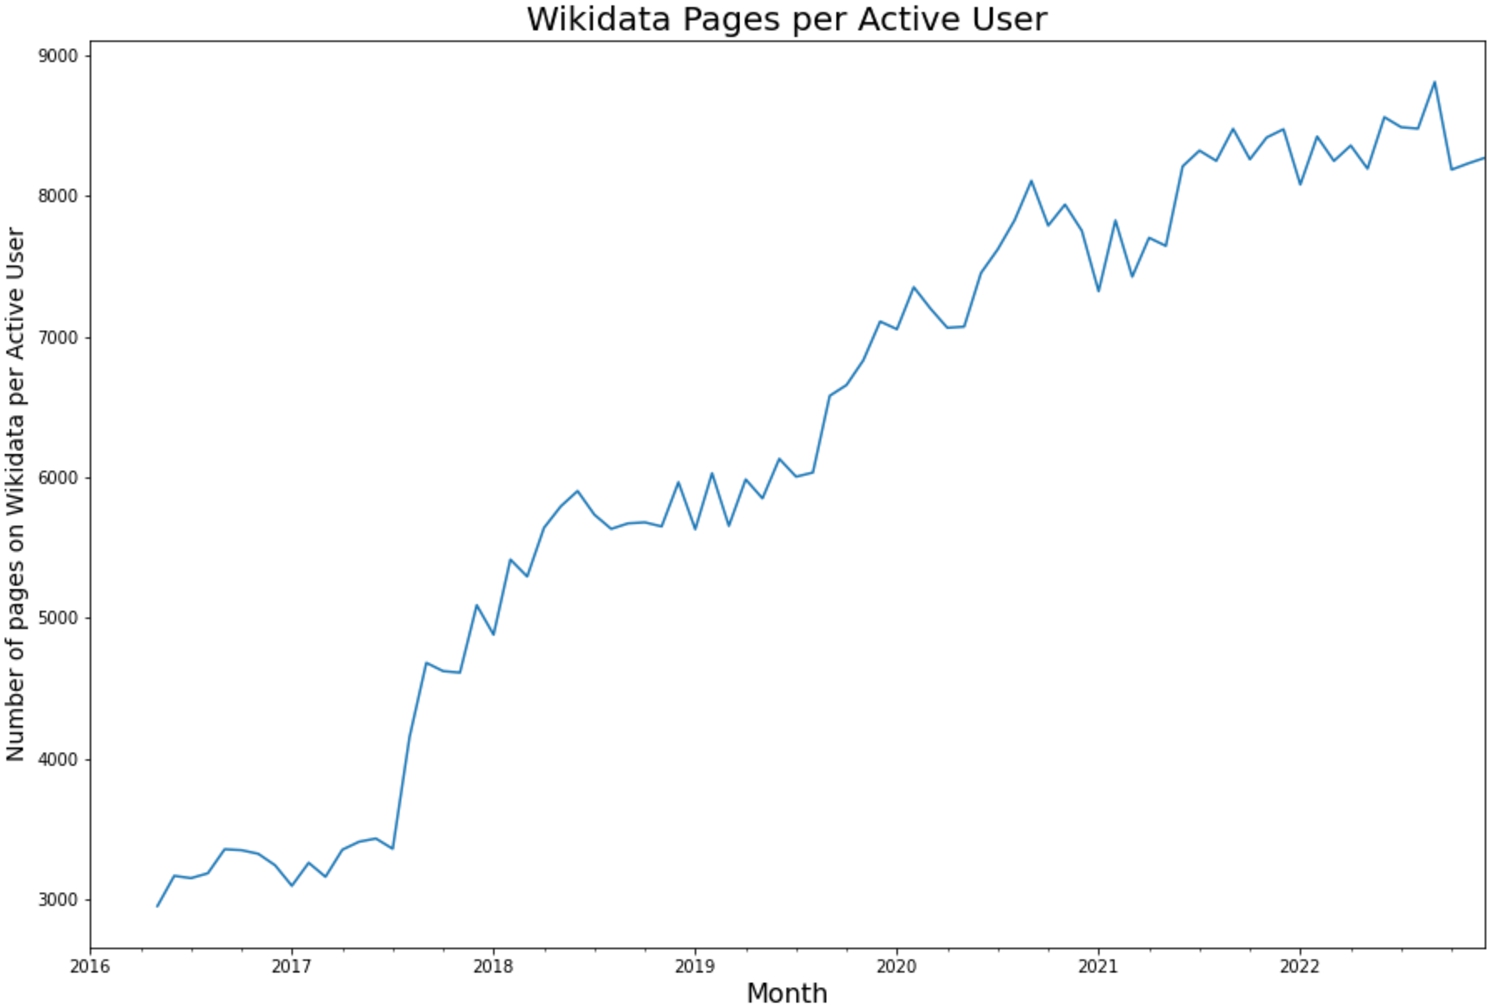 The ratio of pages on Wikidata to active users has steadily increased, indicating that than the growth in articles has outpaced the growth in the active user base on Wikidata.